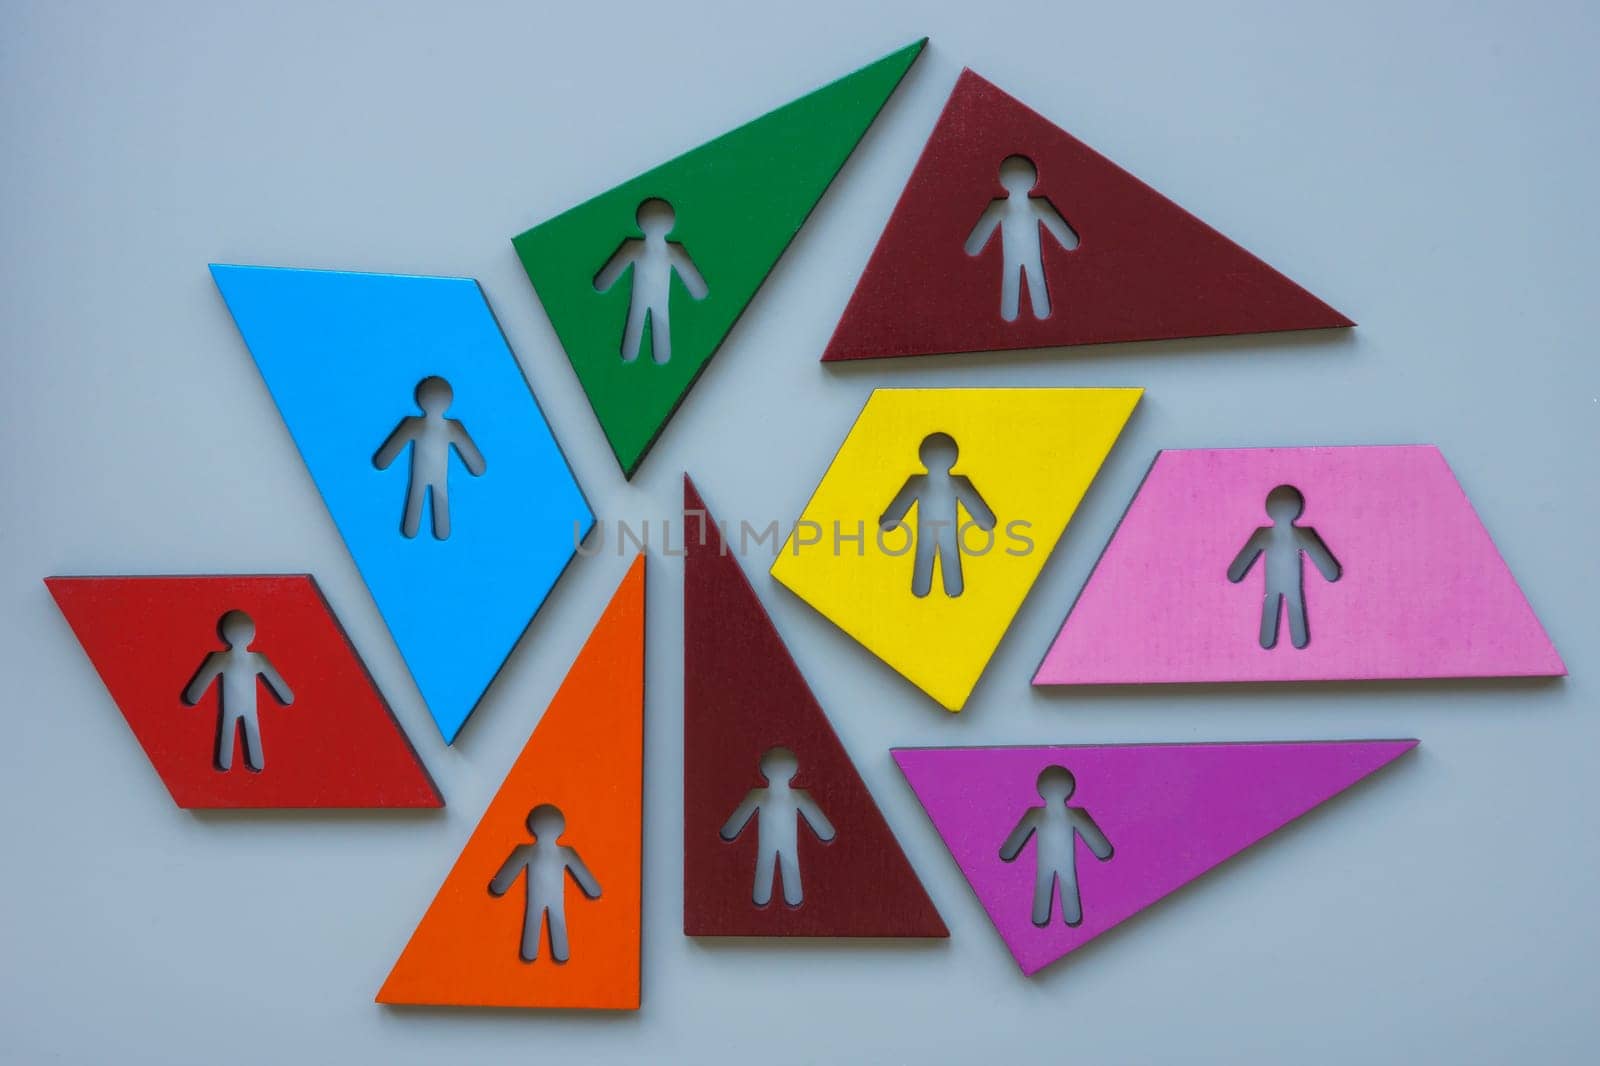 Diversity and inclusion abstract. Multi-colored figures with outlines of people. by designer491